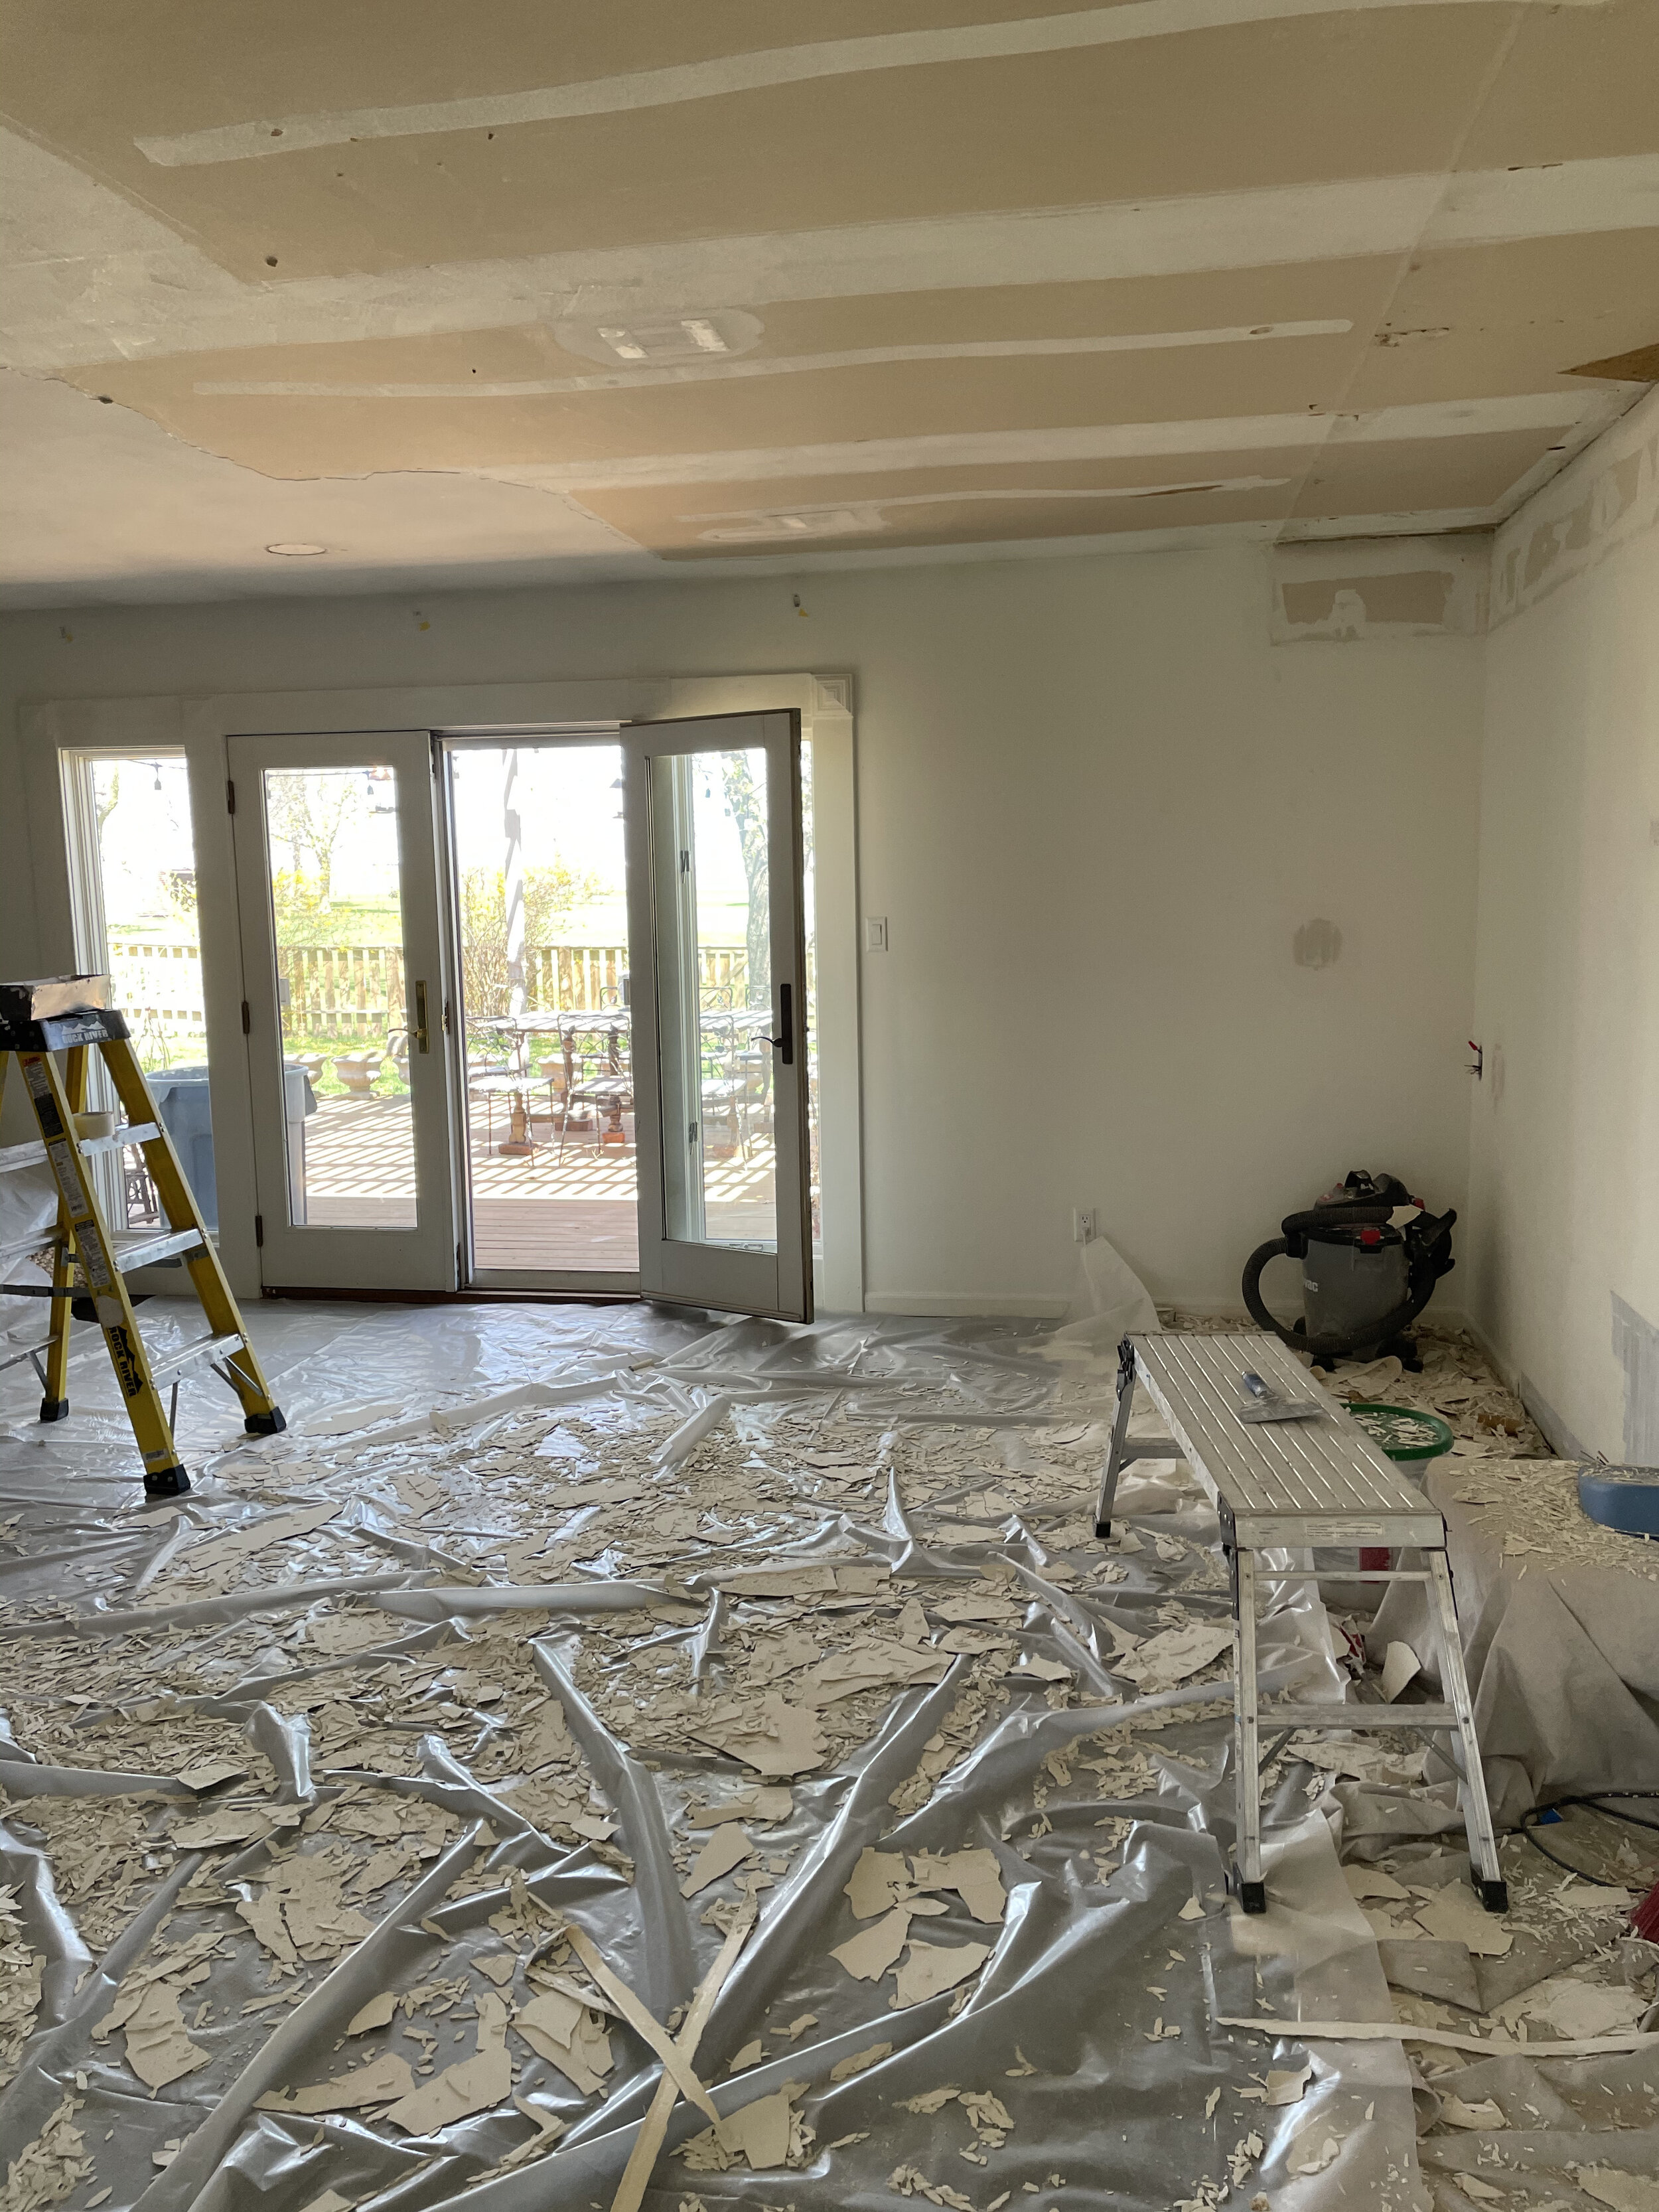 Mid-project, we learned the ceiling was skimcoated smooth over an old popcorn ceiling, so that meant a lot of scraping to get down to the drywall